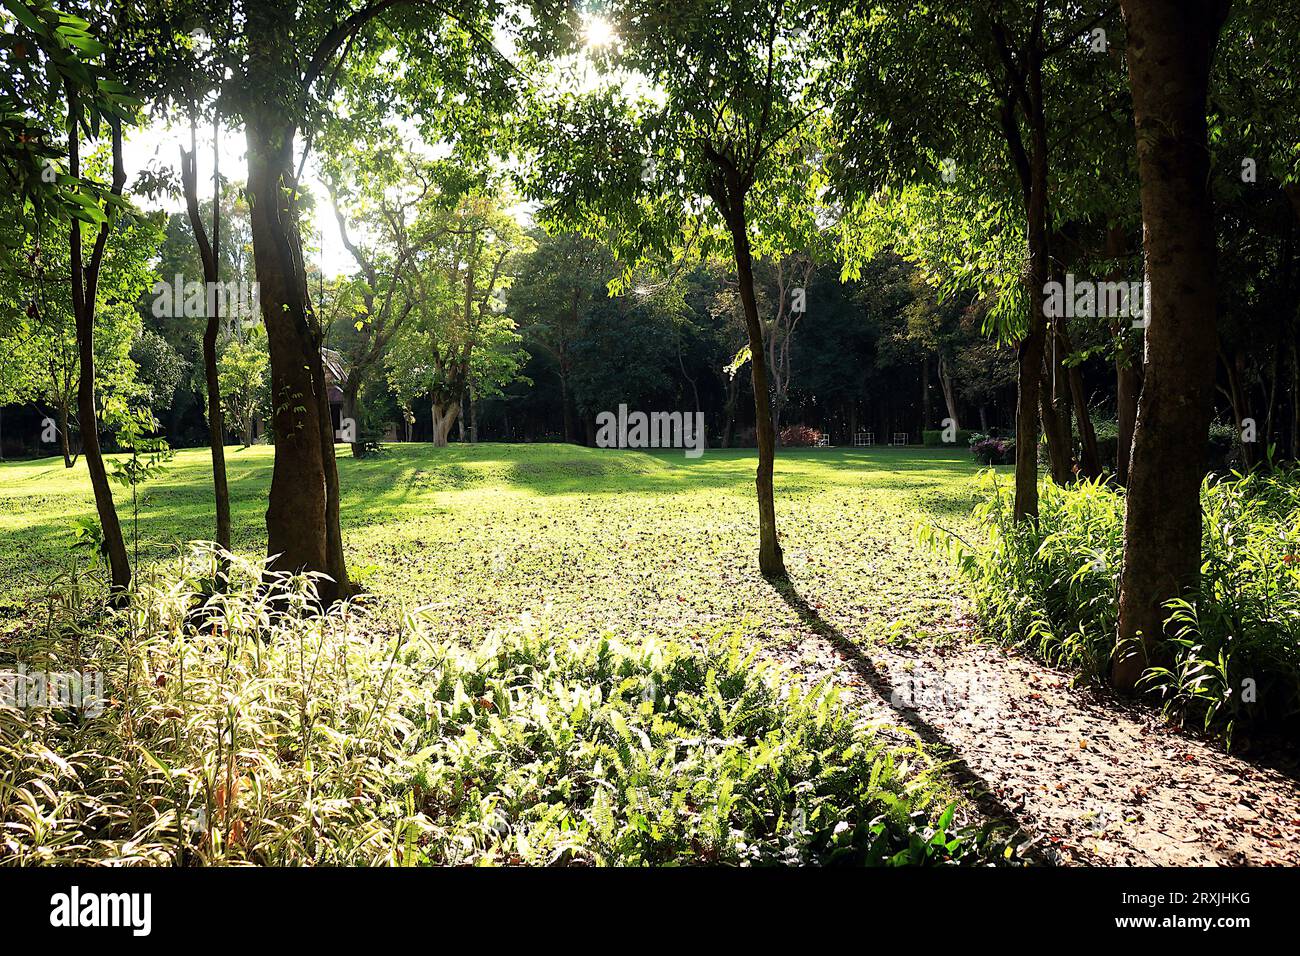 A park with lush green trees and bright sunlight shining through is a relaxing sight. Stock Photo